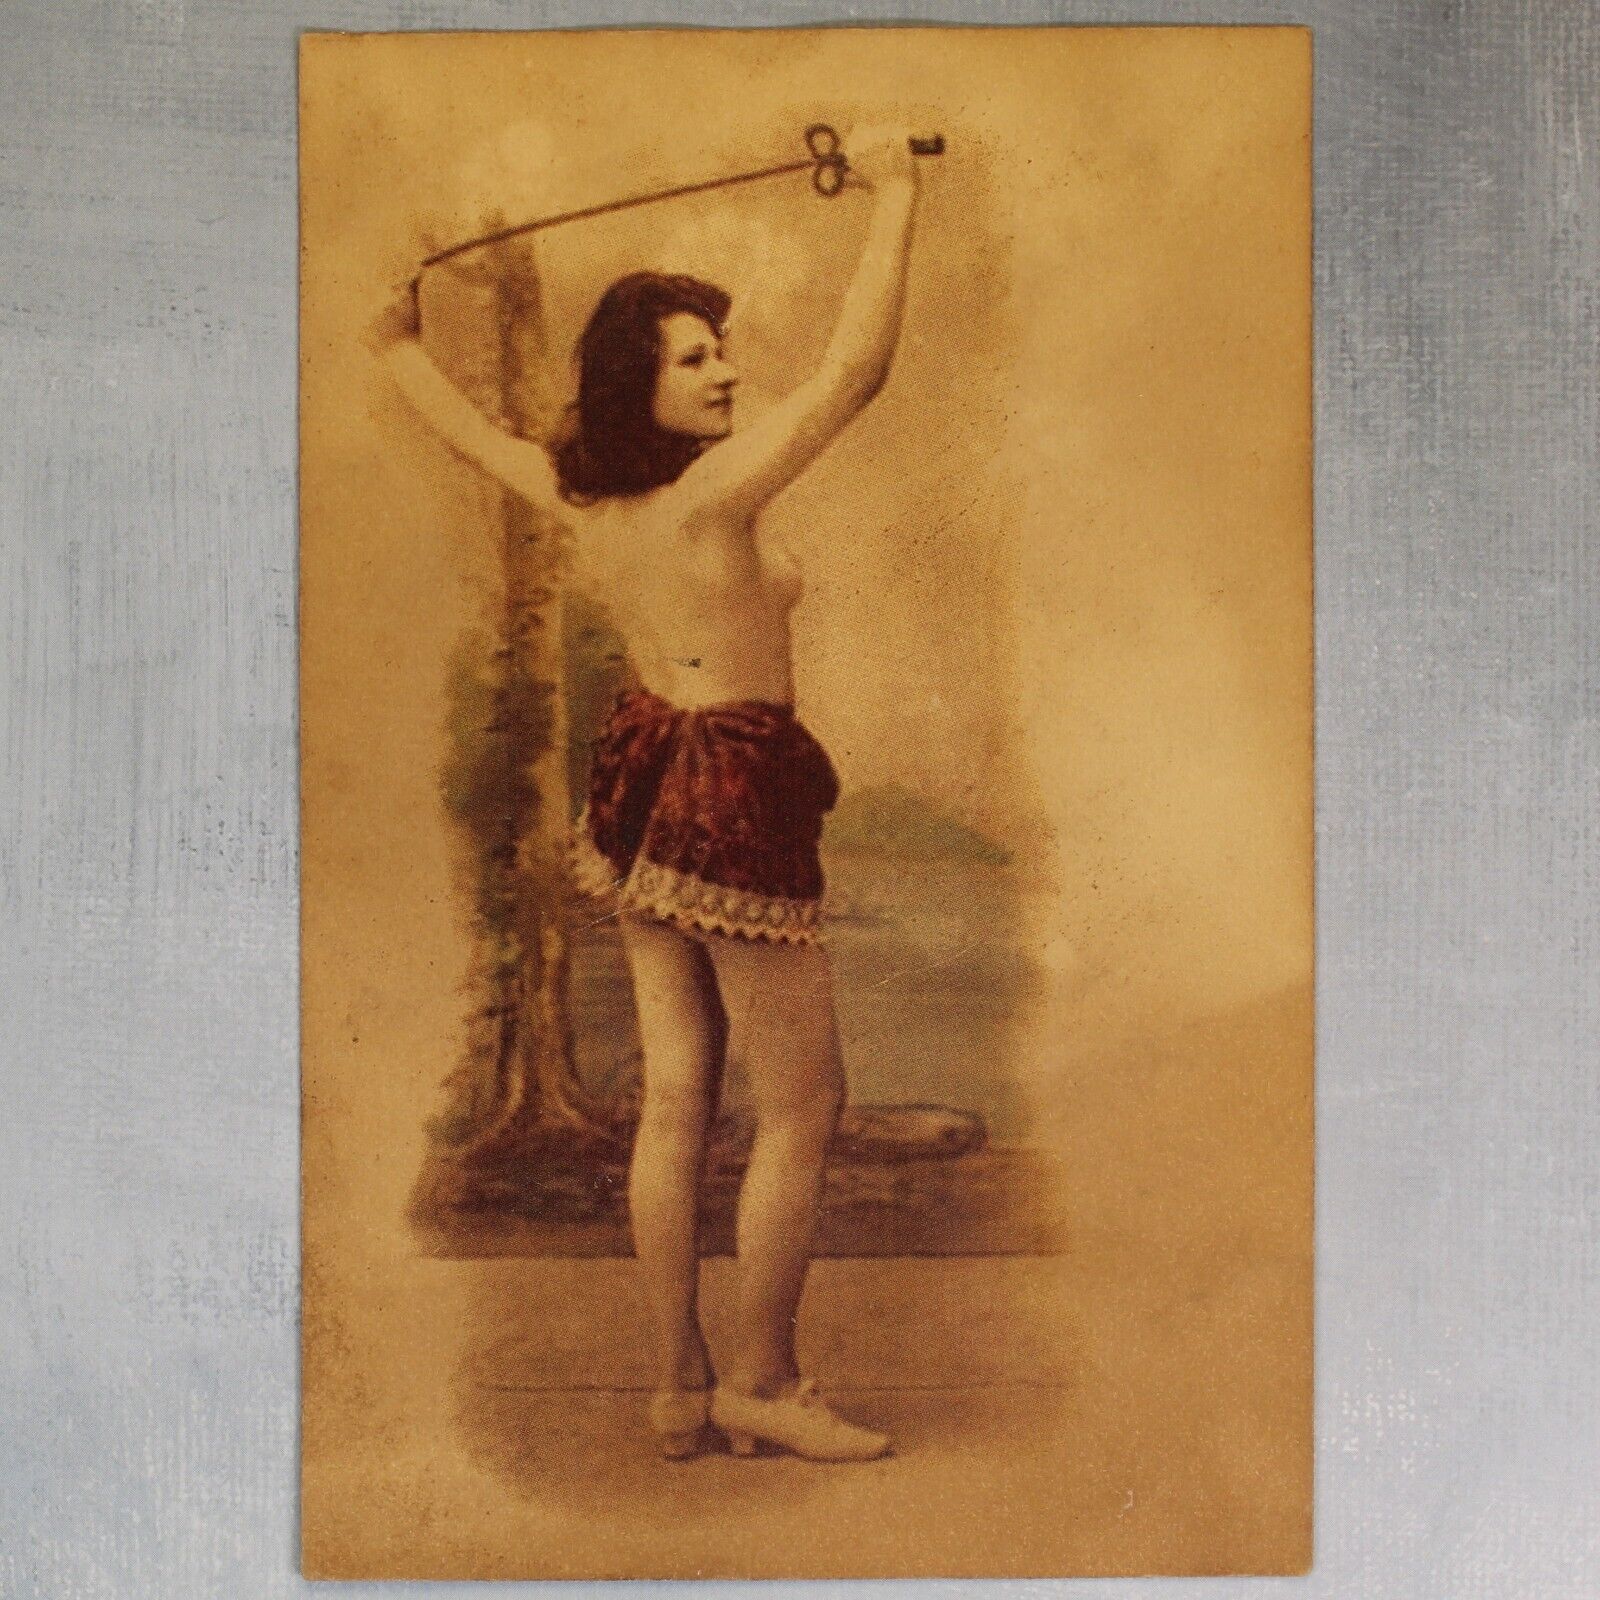 Semi nude woman fencer with sword. Mini skirt. Fencing. Antique postcard 1906s